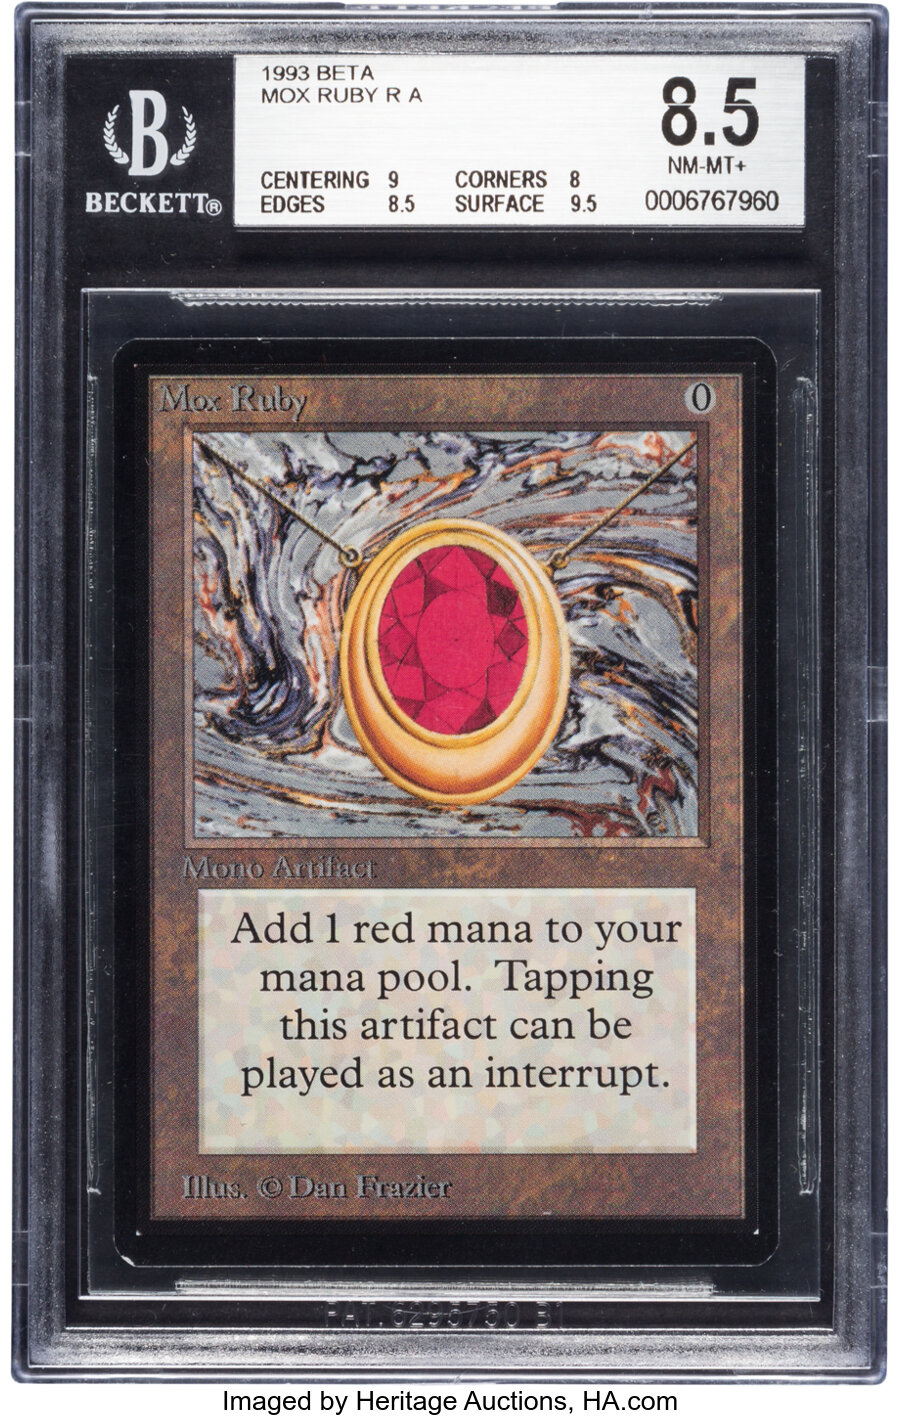 Magic: The Gathering Mox Ruby Beta Edition Trading Card (Wizards of the Coast, 1993) BGS NM-MT+ 8.5